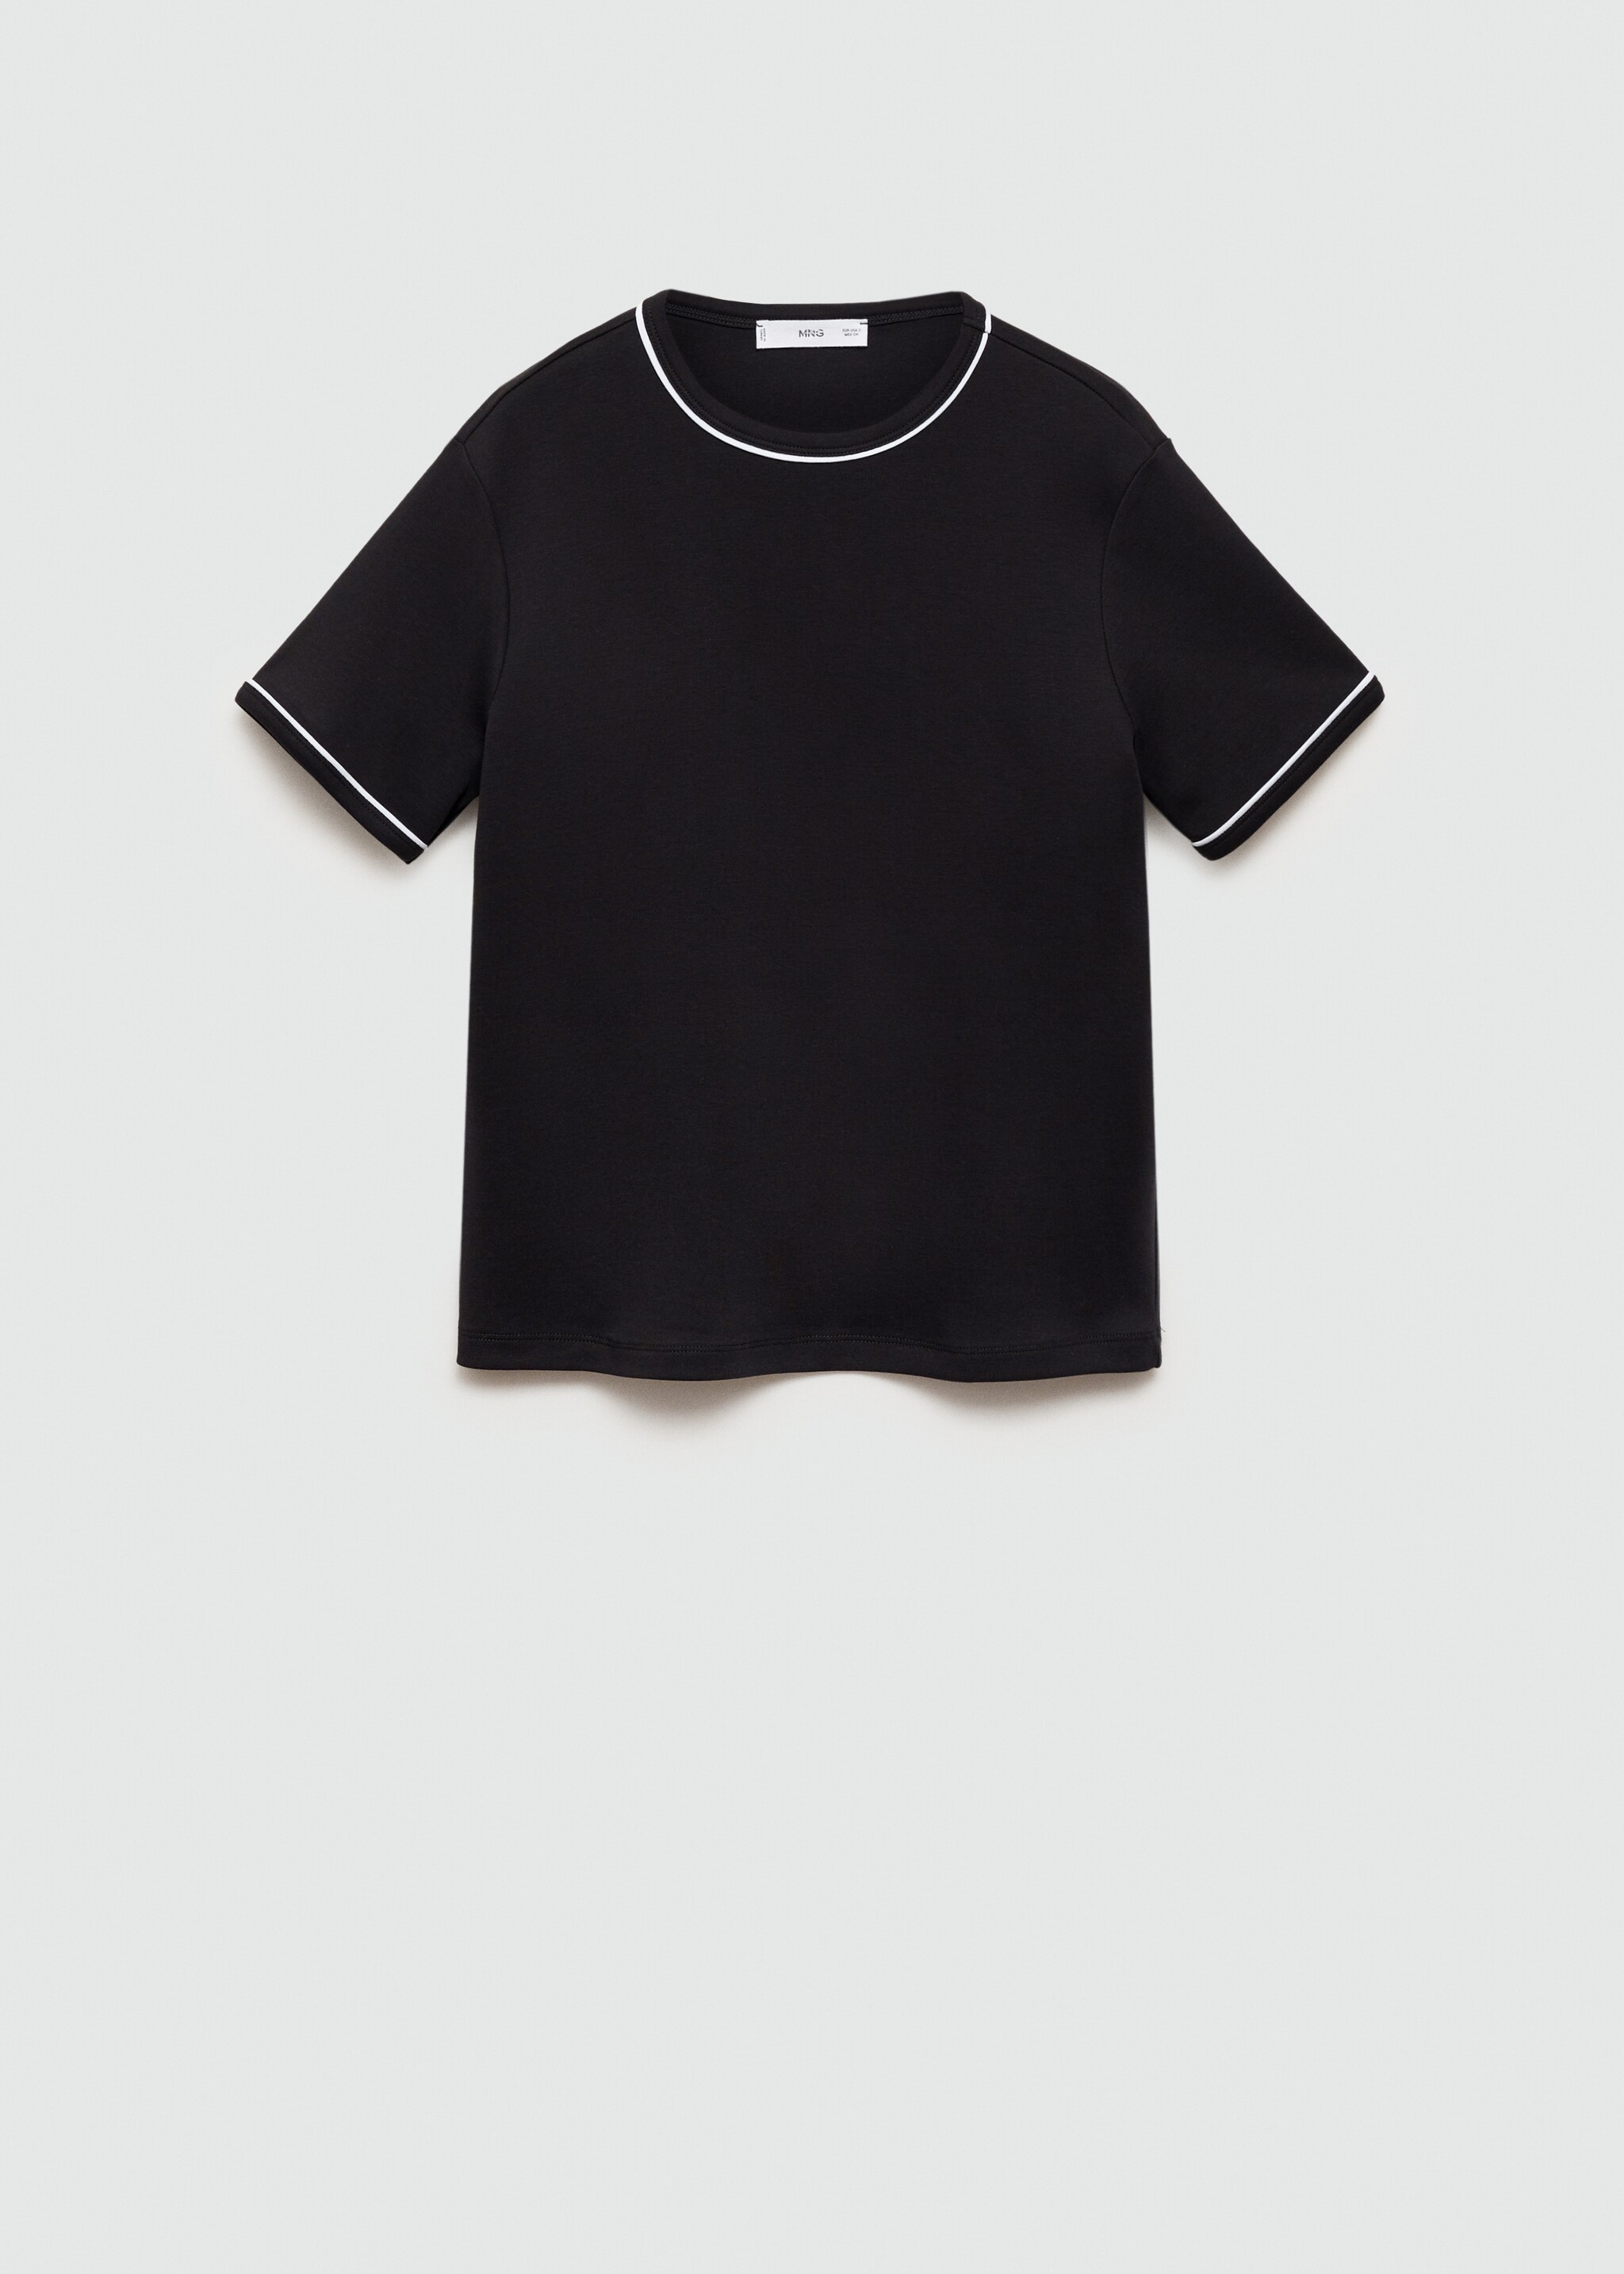 100% cotton t-shirt with contrast piping - Article without model